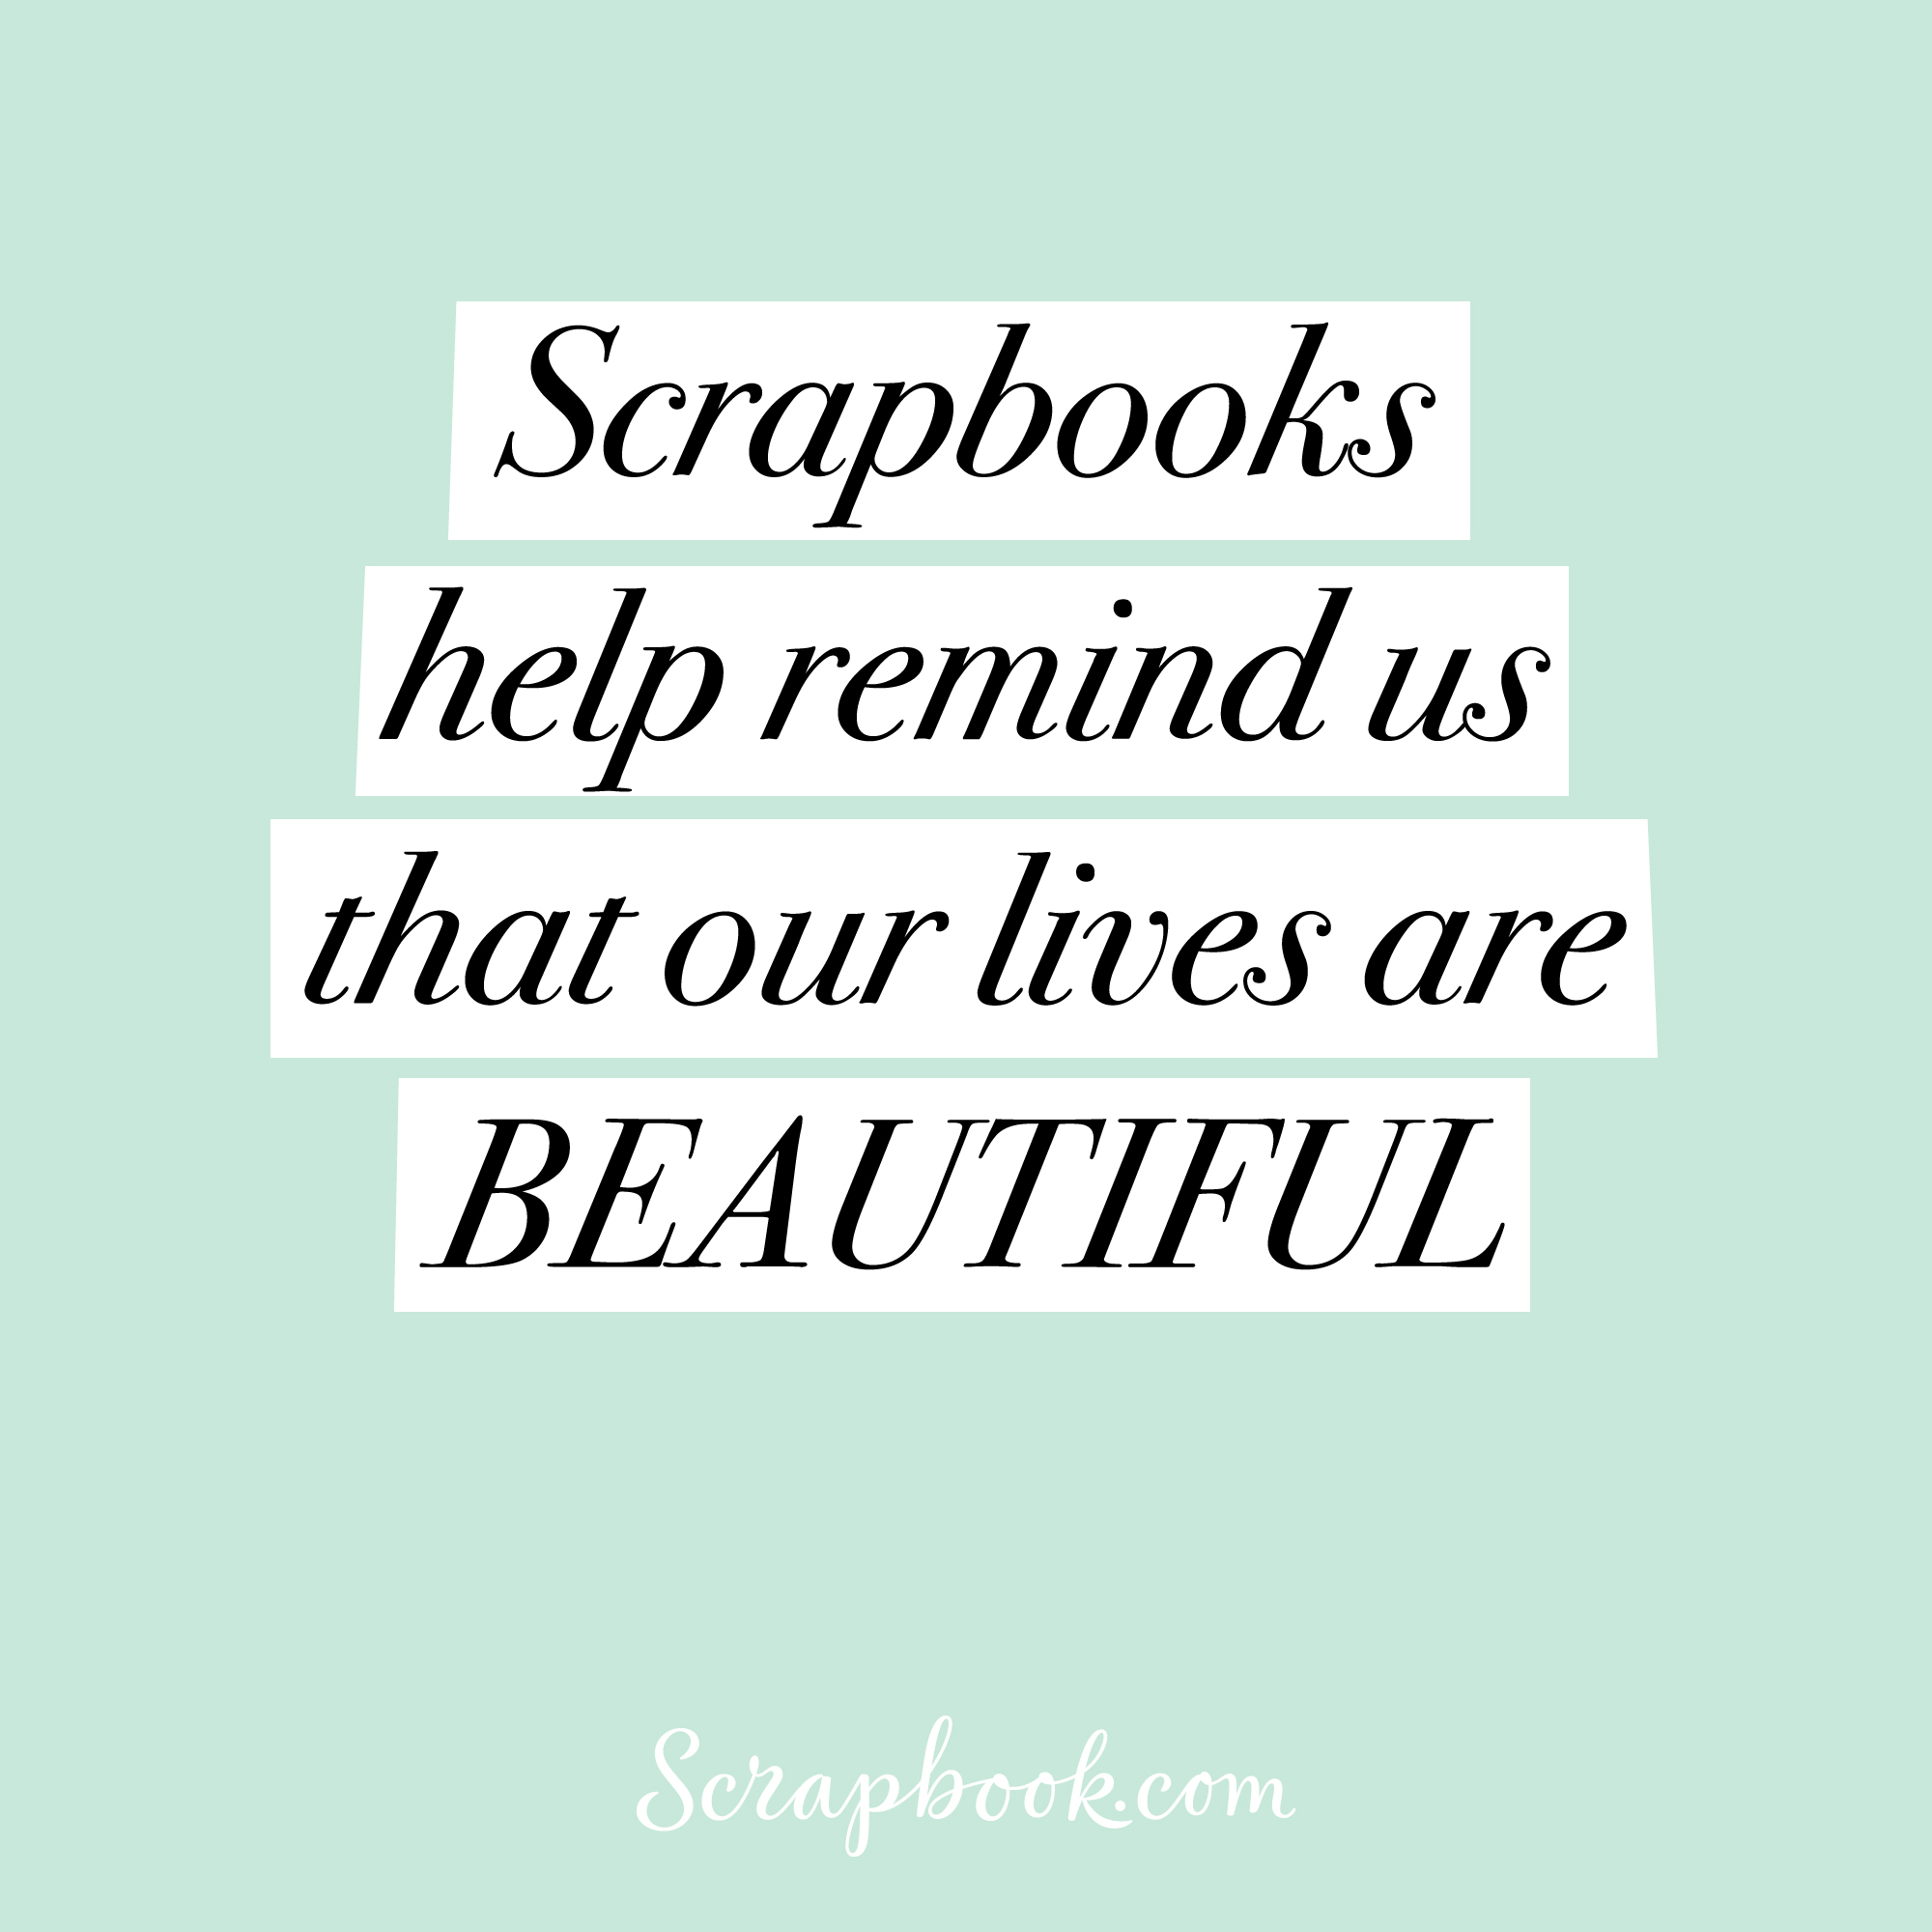 Scrapbooks help remind us that our lives are BEAUTIFUL